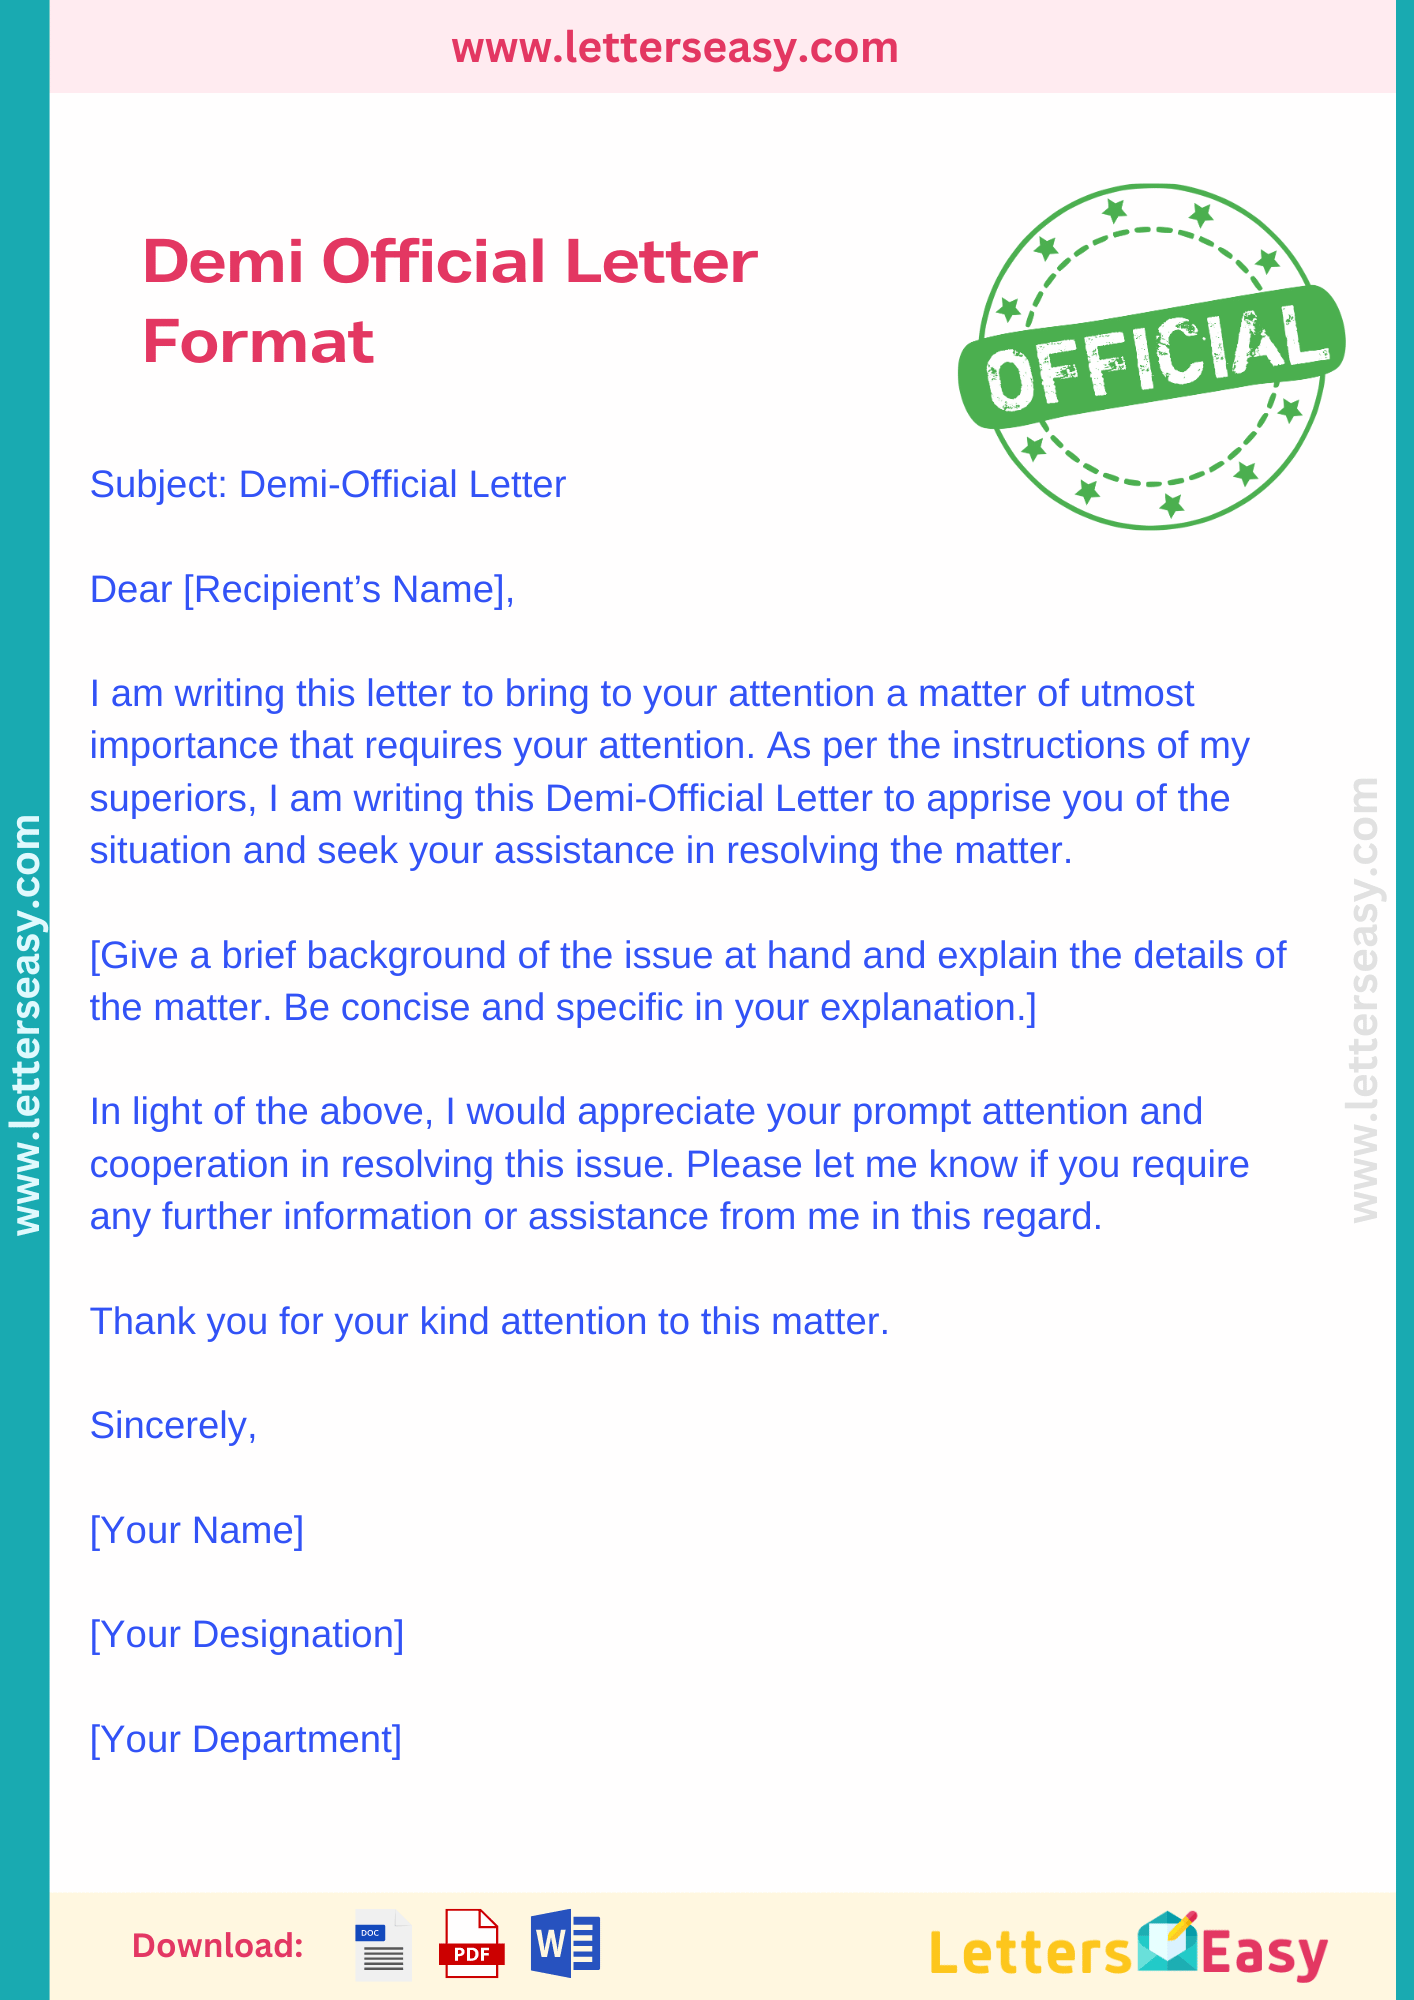 demi-official-letter-format-3-examples-email-template-writing-tips-sample-letters-easy